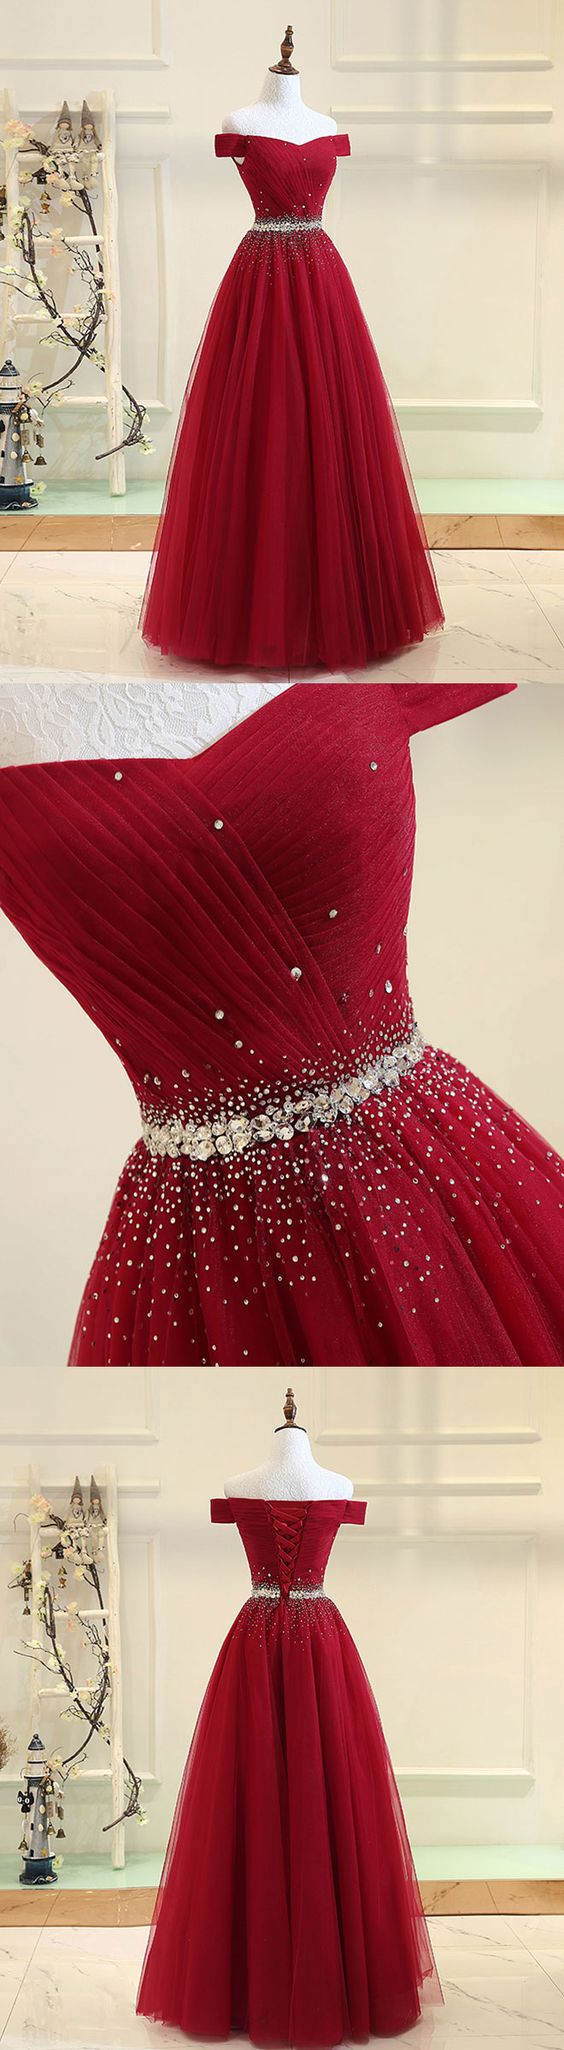 Red Long Prom Dresses,off The Shoulder Prom Gowns,red Evening Dresses, A-line Evening Gowns, Cocktail Dresses Custom